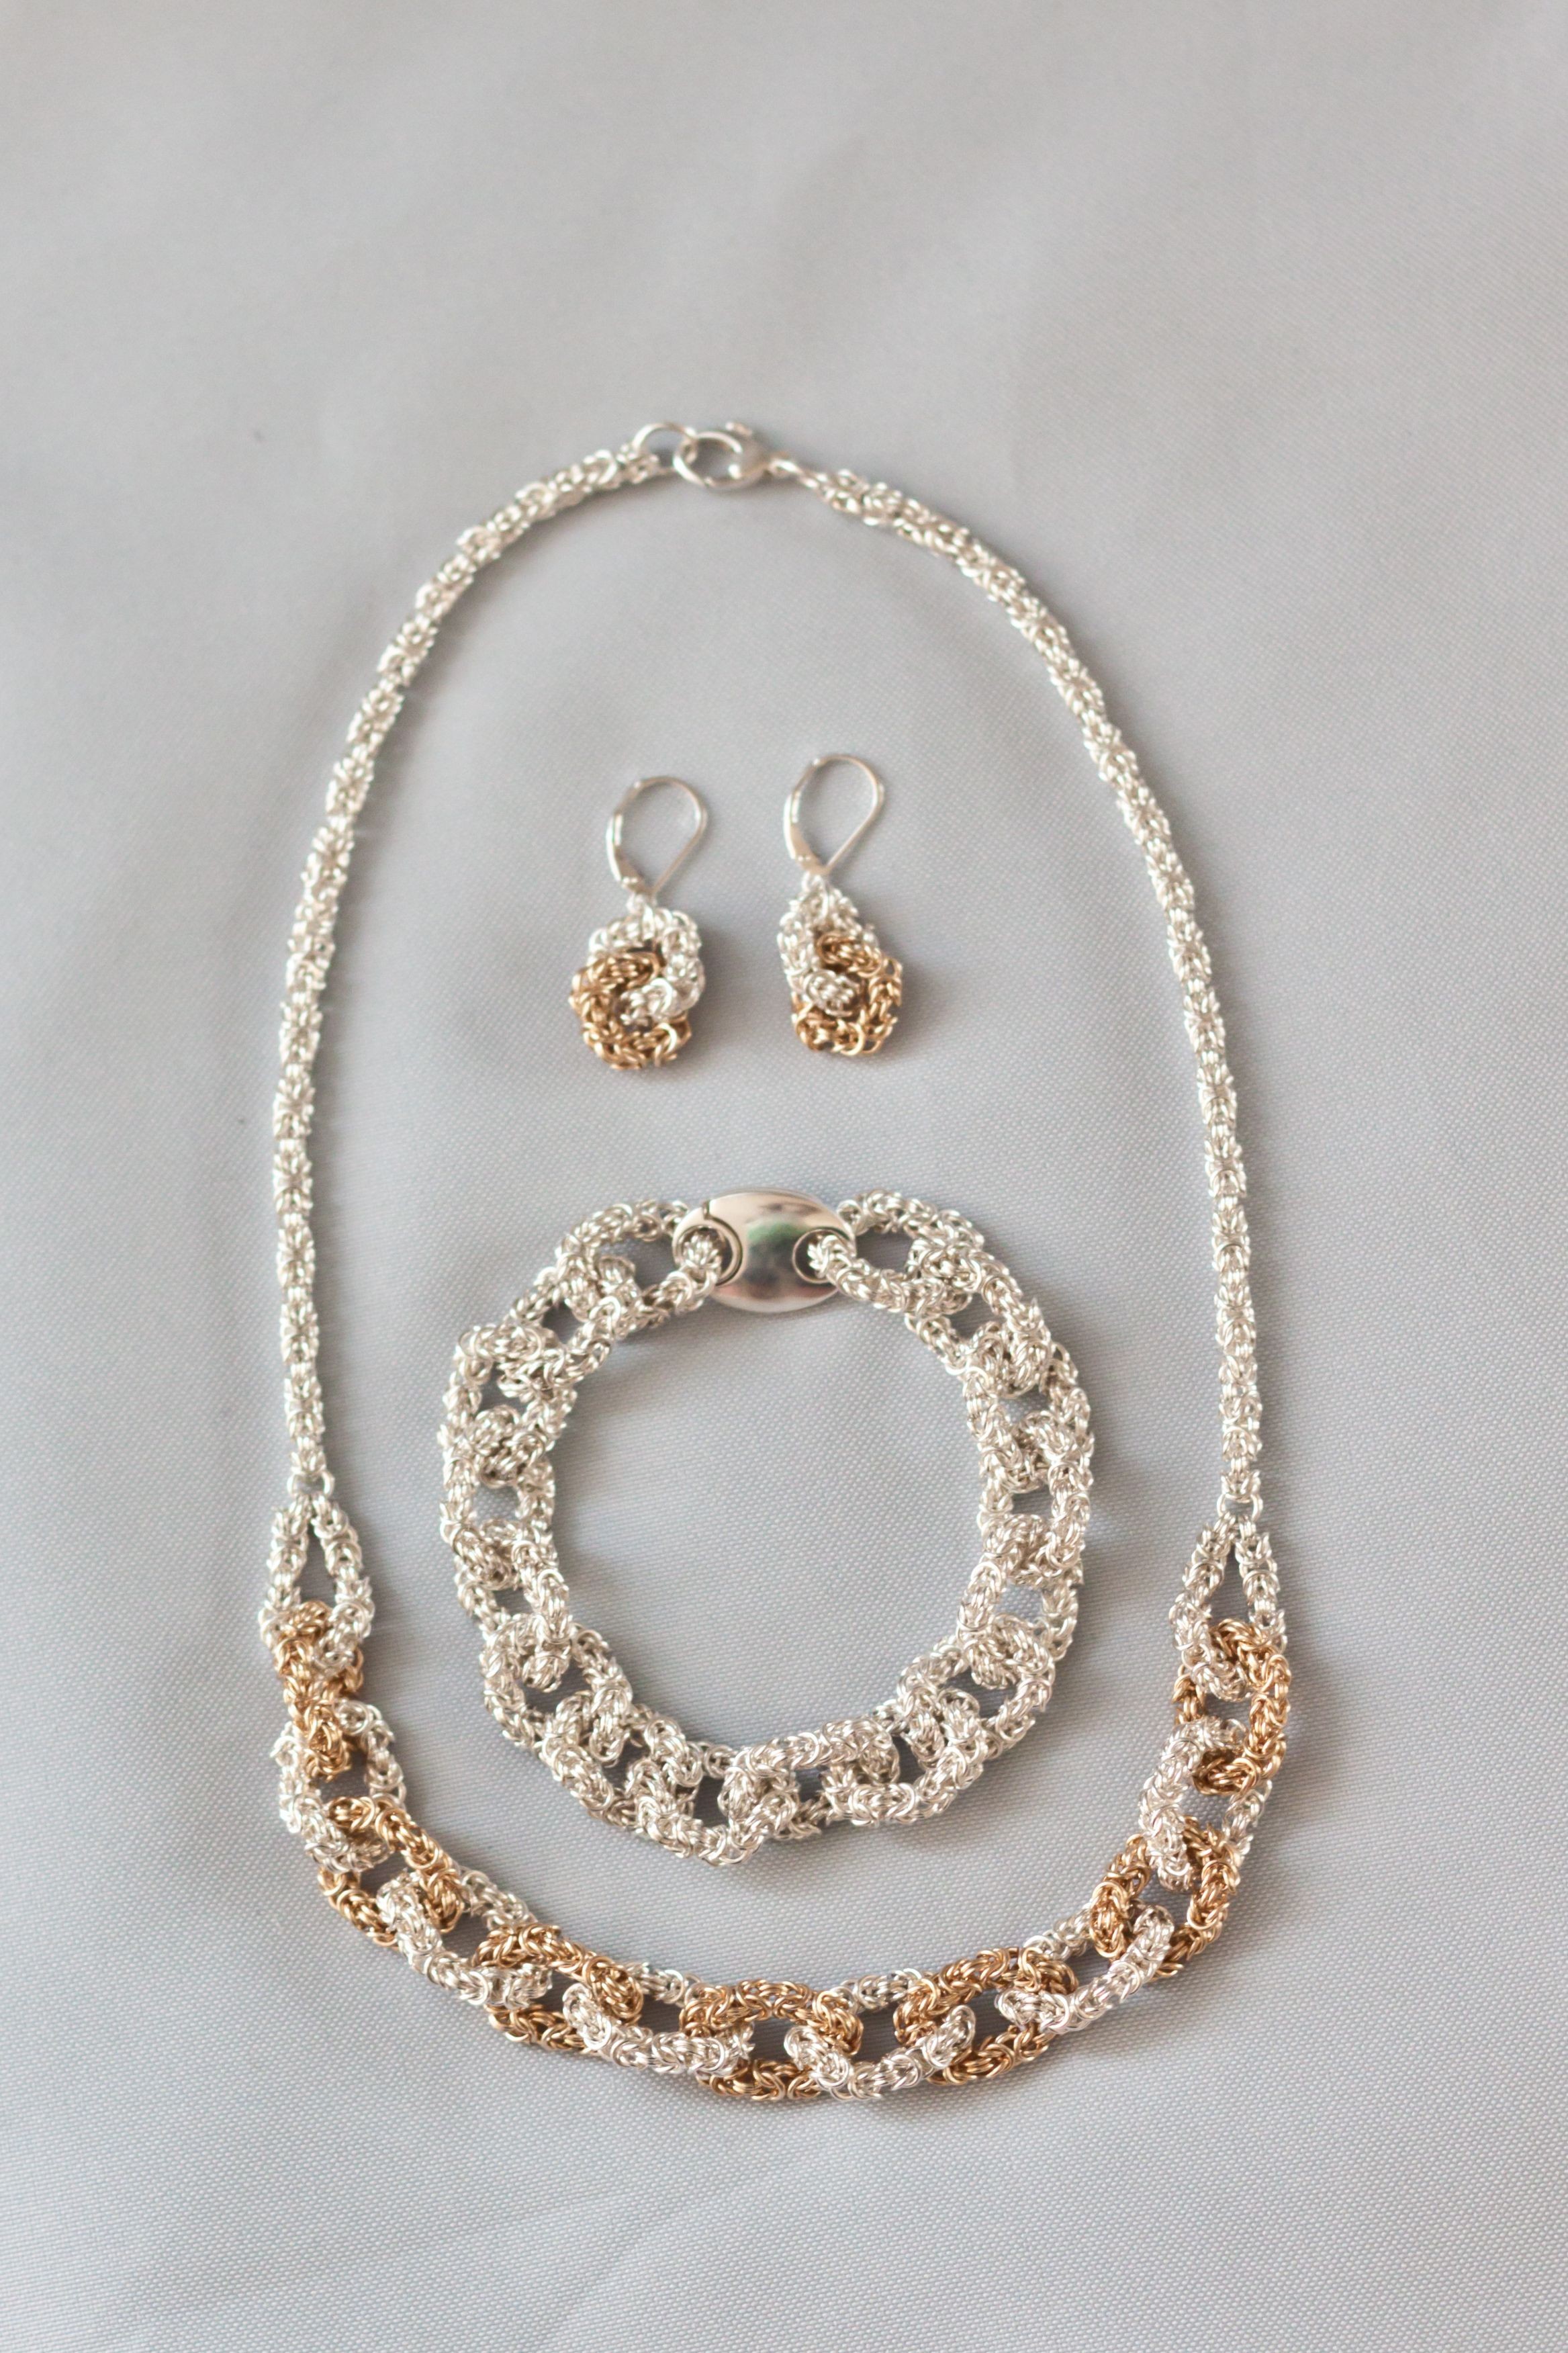 Chain of Links Necklace and Earrings